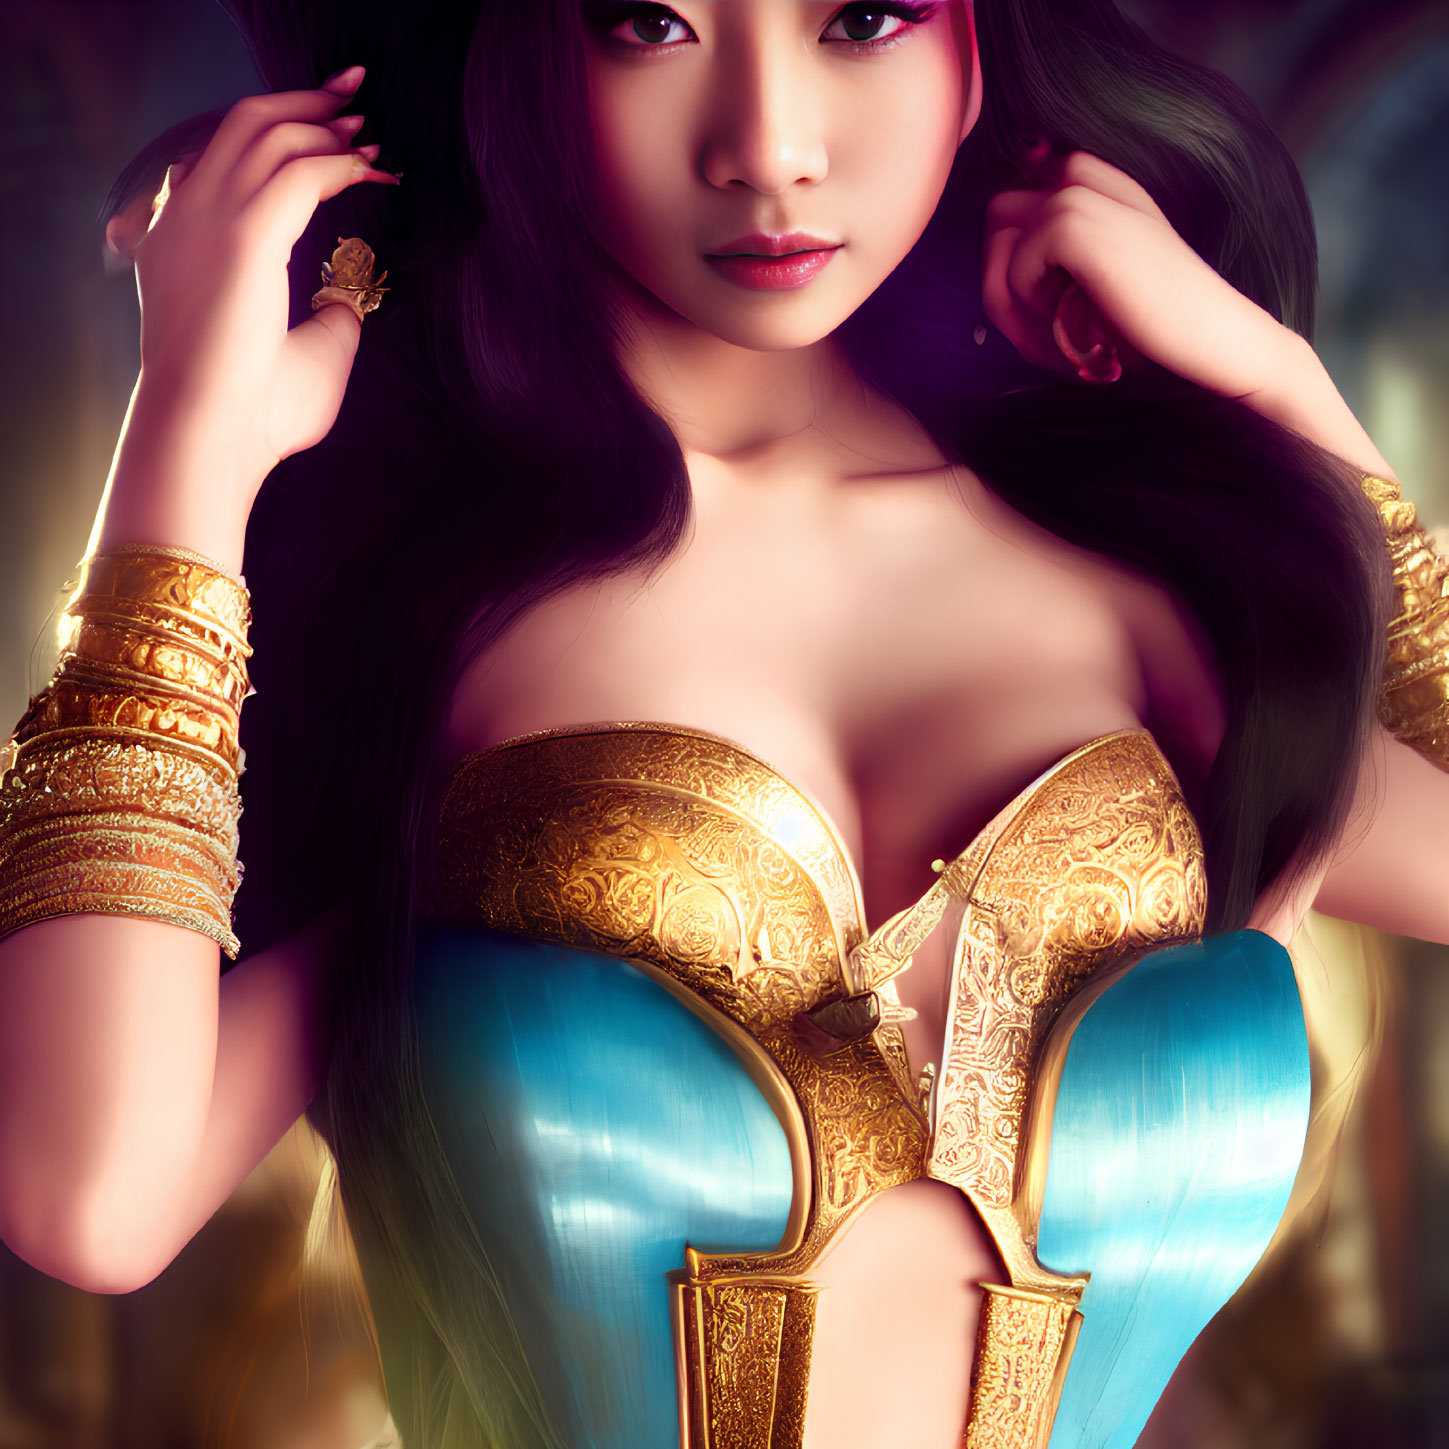 Digital Artwork: Woman with Long Black Hair and Gold Jewelry